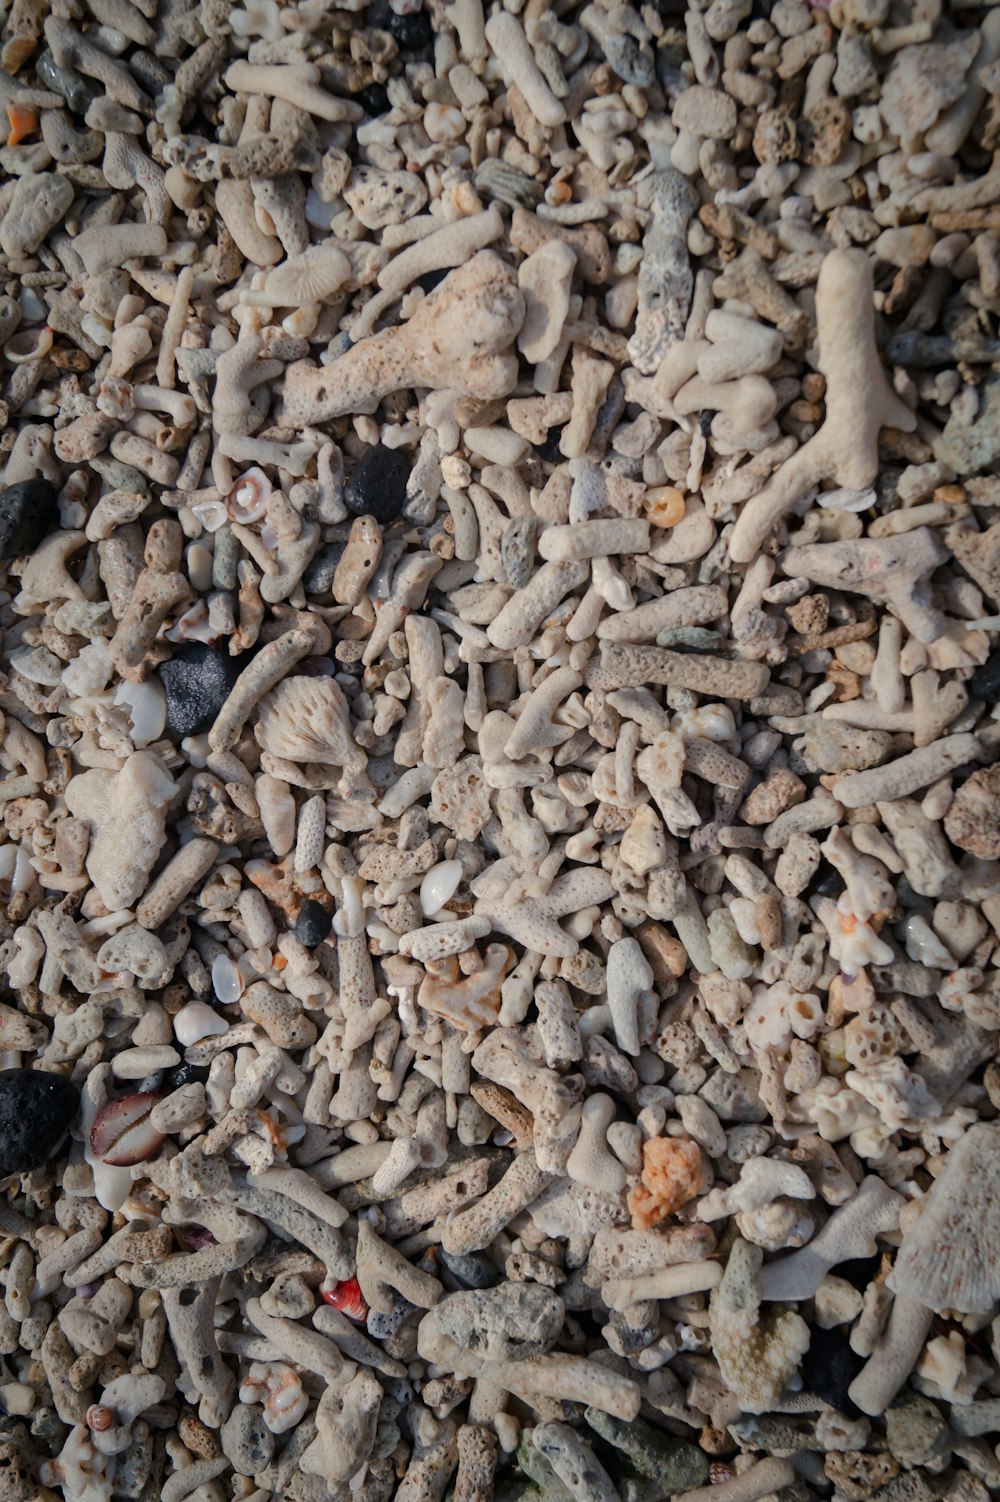 a close up of a pile of rocks and gravel